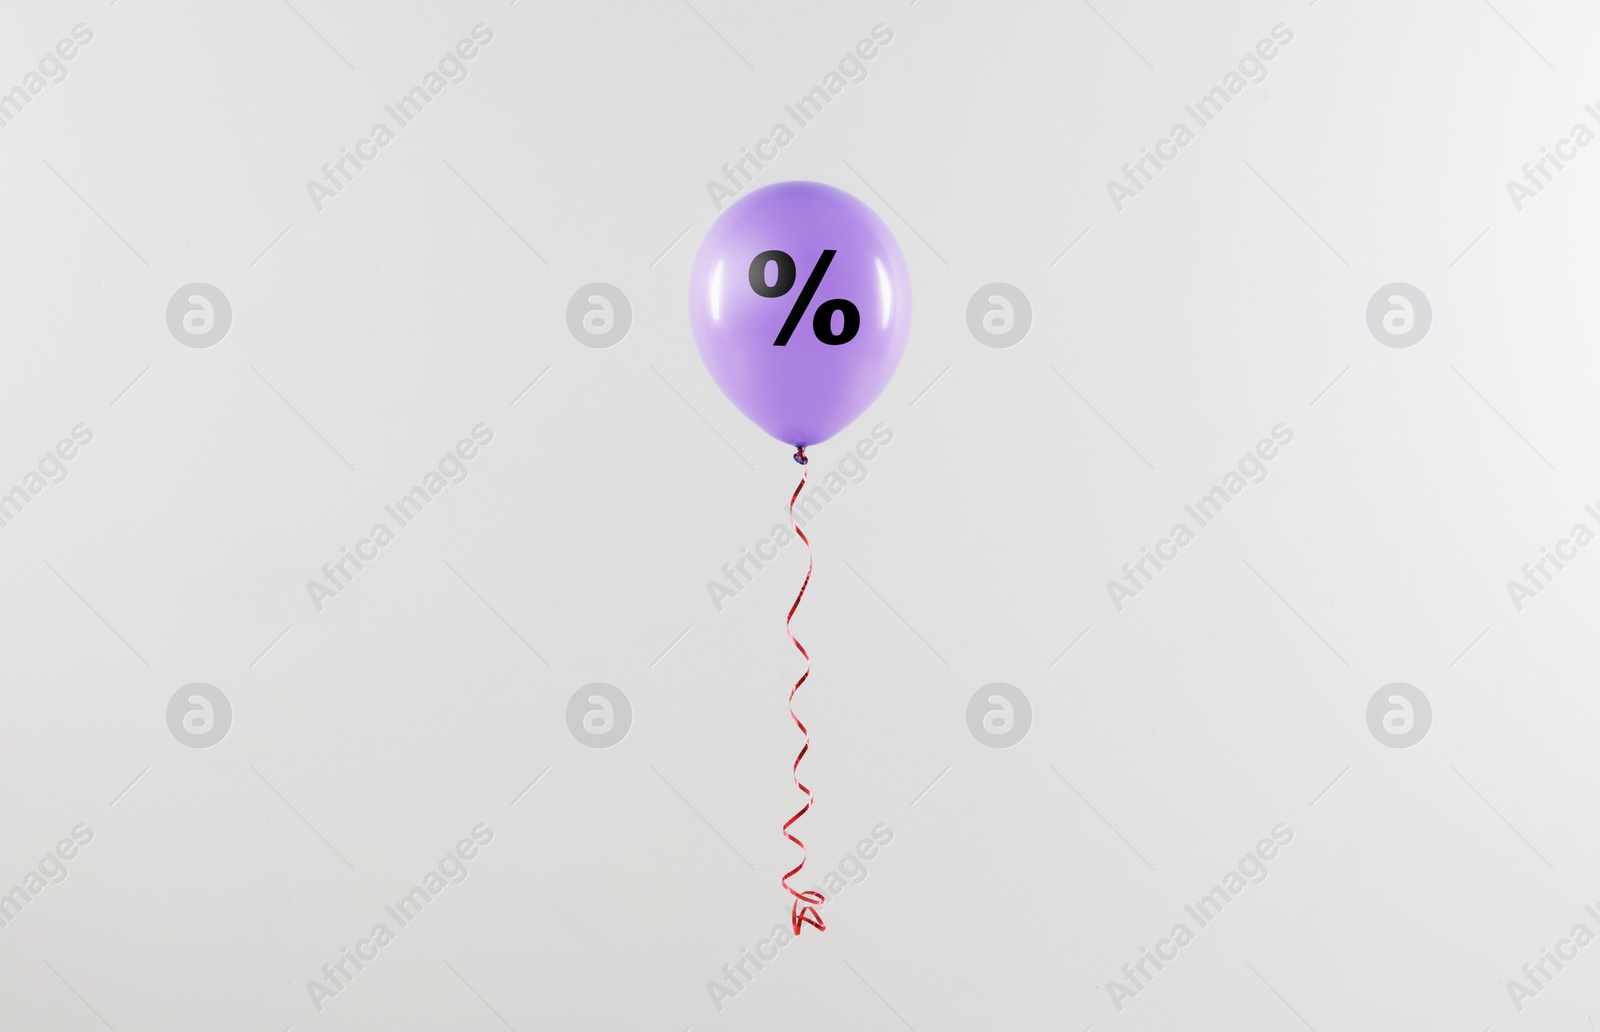 Image of Discount offer. Violet balloon with percent sign on white background